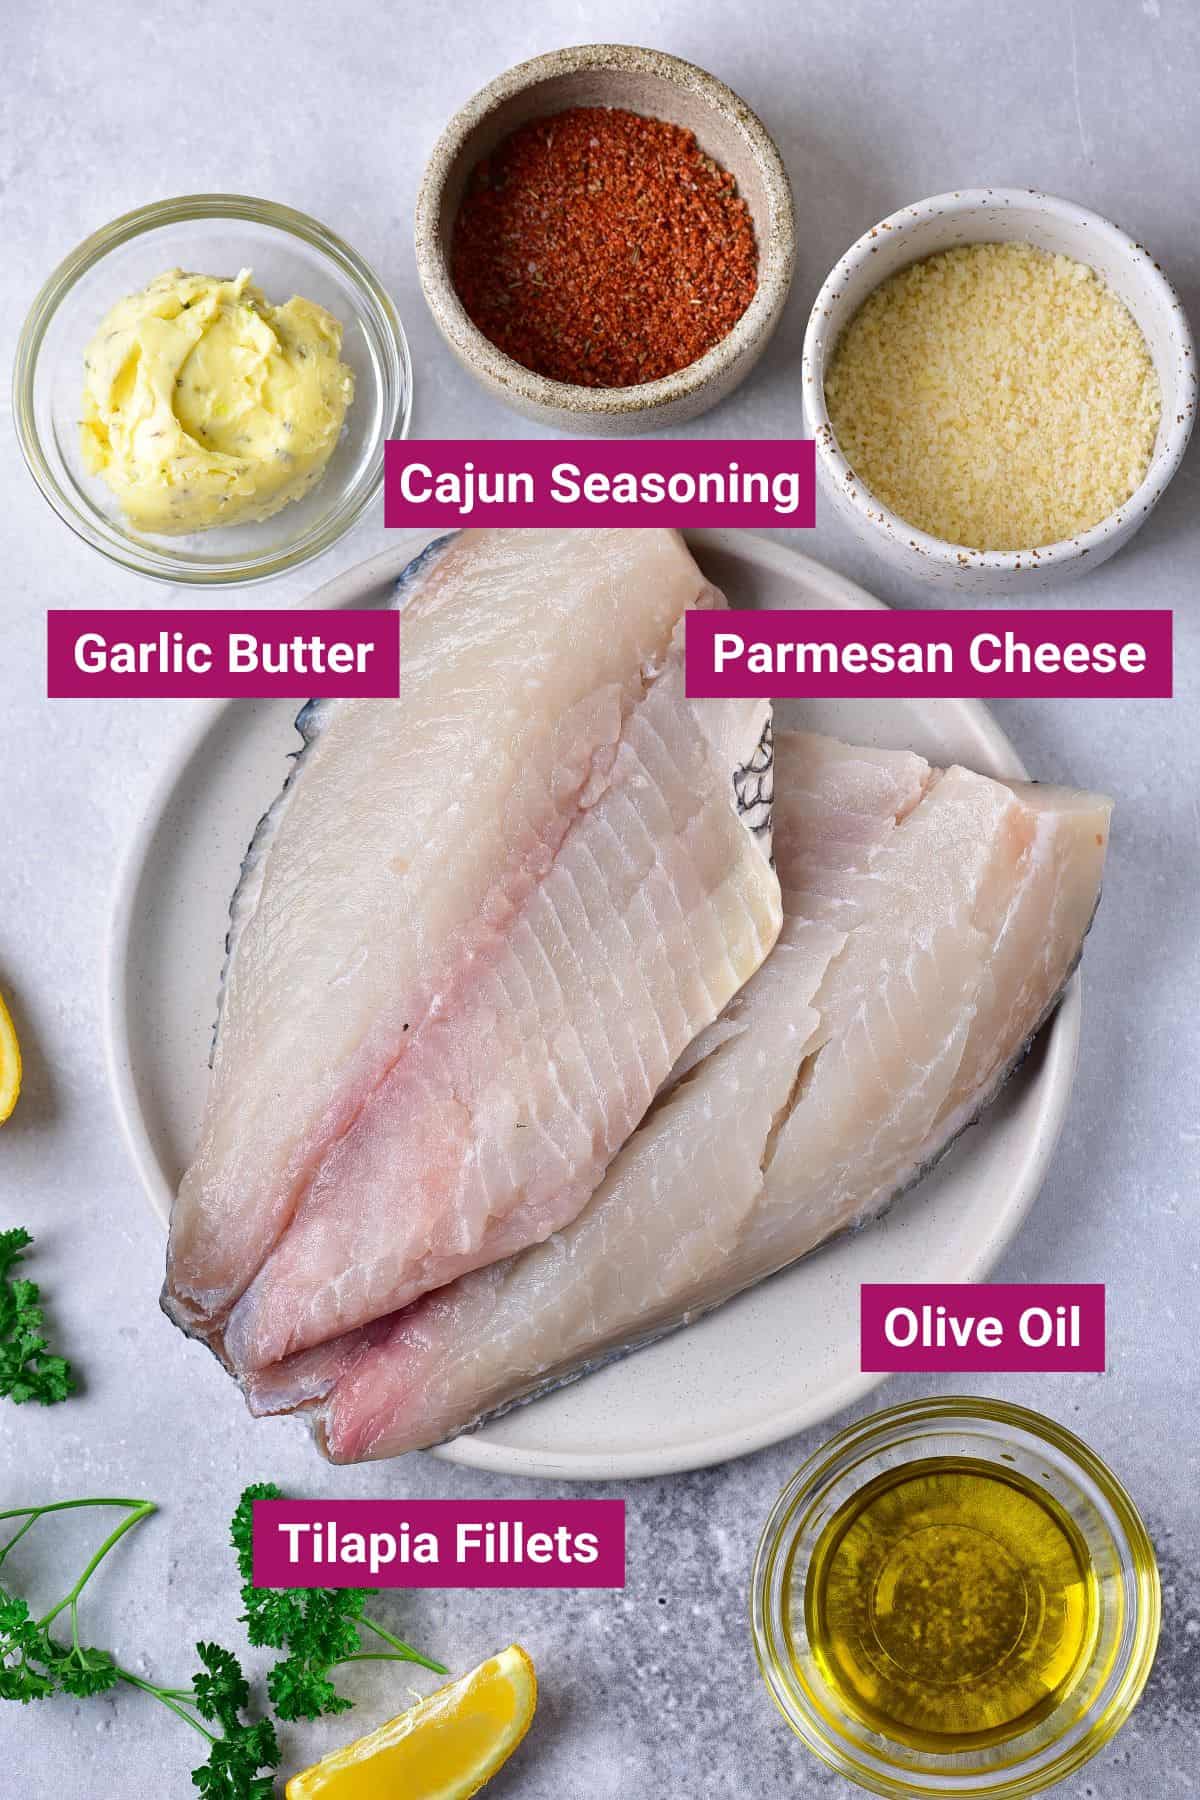 ingredients needed to air fry tilapia: cajun seasoning, garlic butter, parmesan cheese, olive oil and tilapia fillets in separate bowls